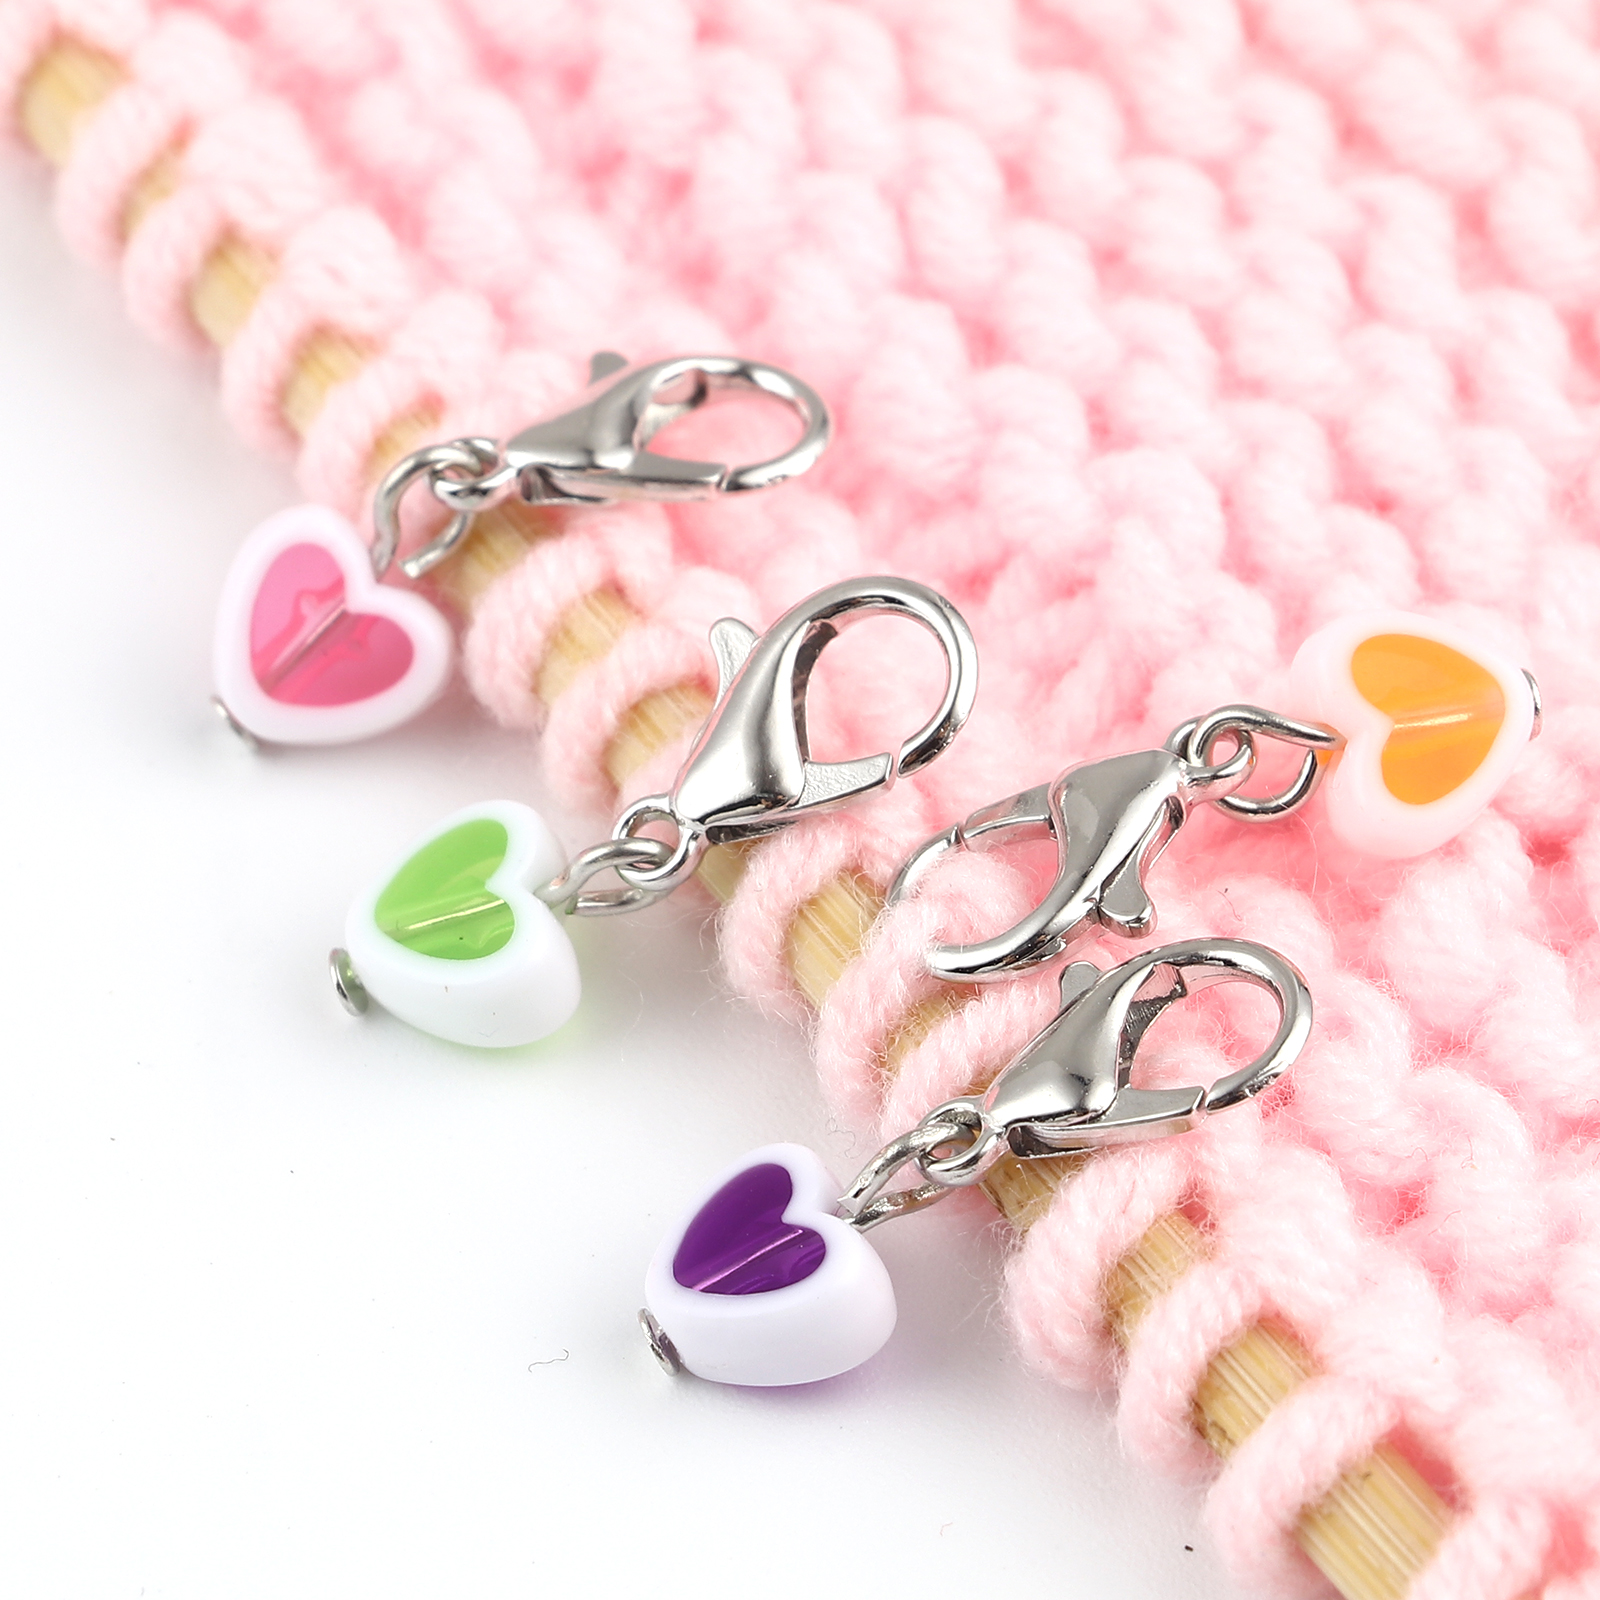 Picture of Zinc Based Alloy & Acrylic Knitting Stitch Markers Heart Silver Tone At Random Color 27mm x 9mm, 12 PCs